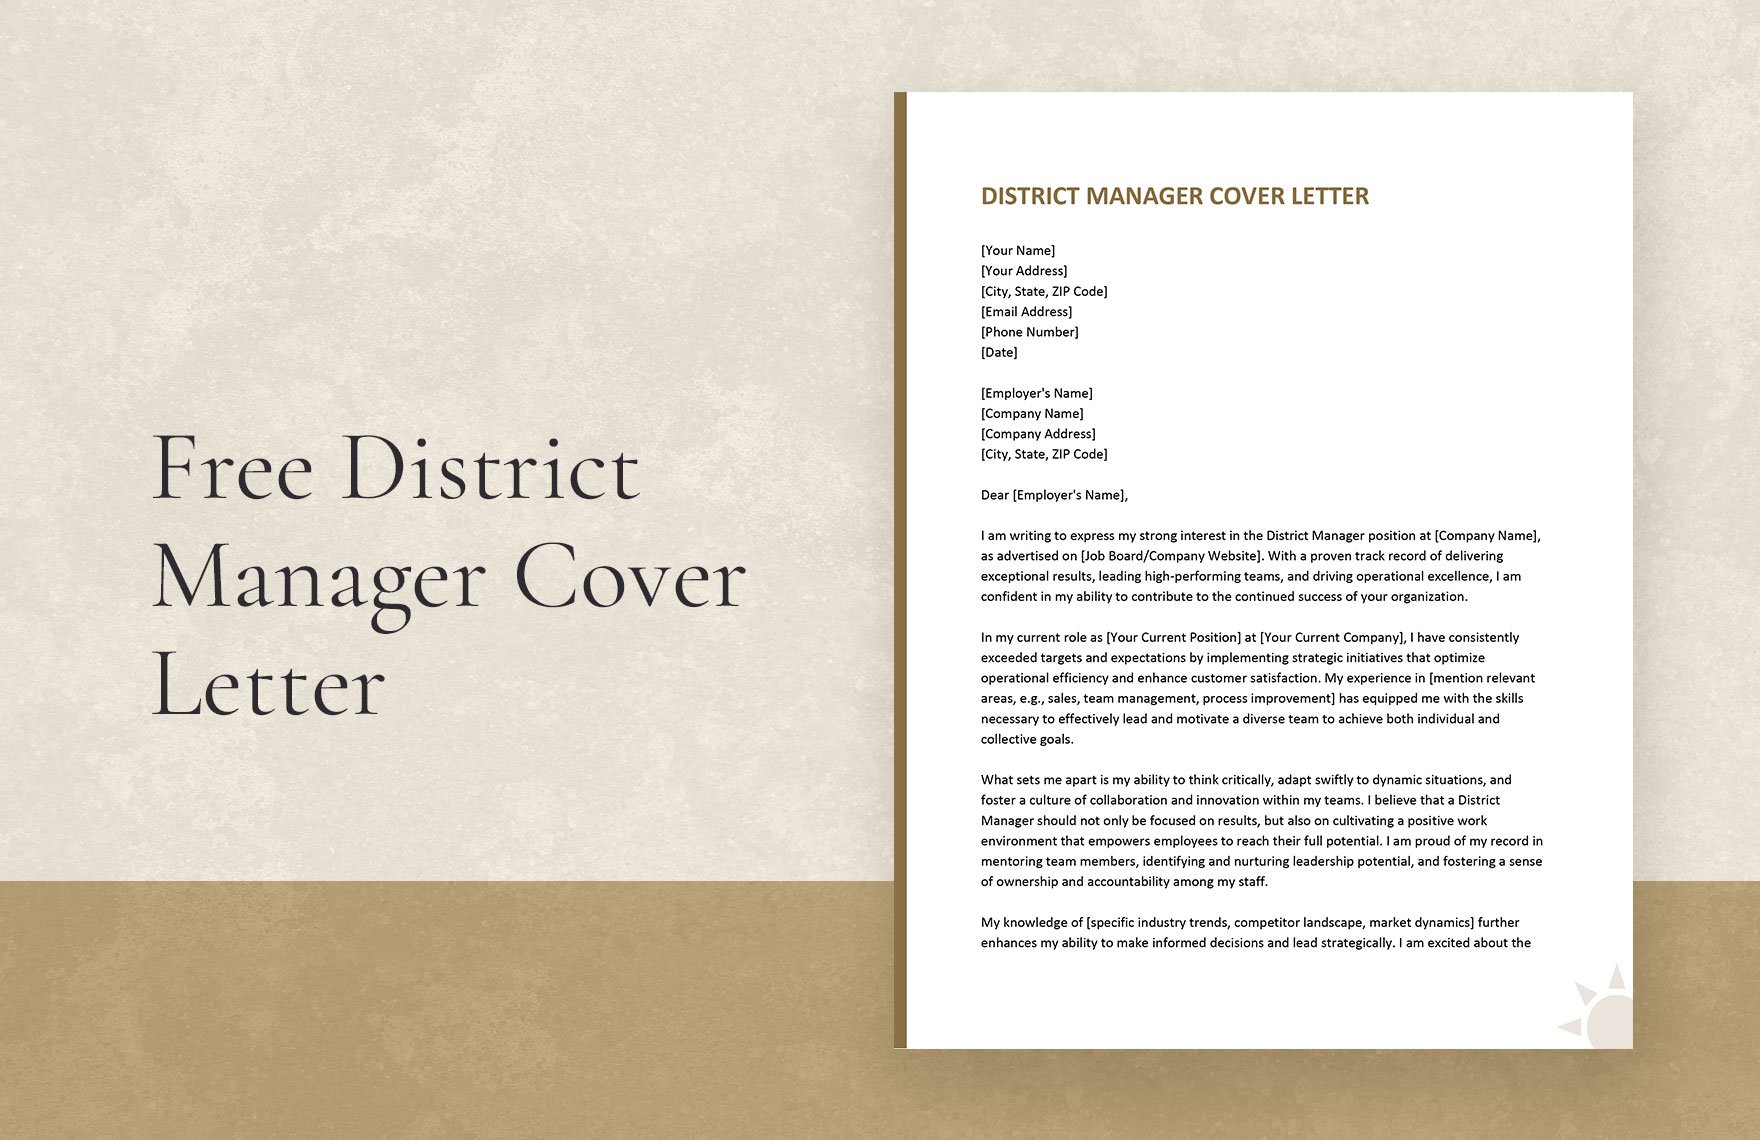 District Manager Cover Letter